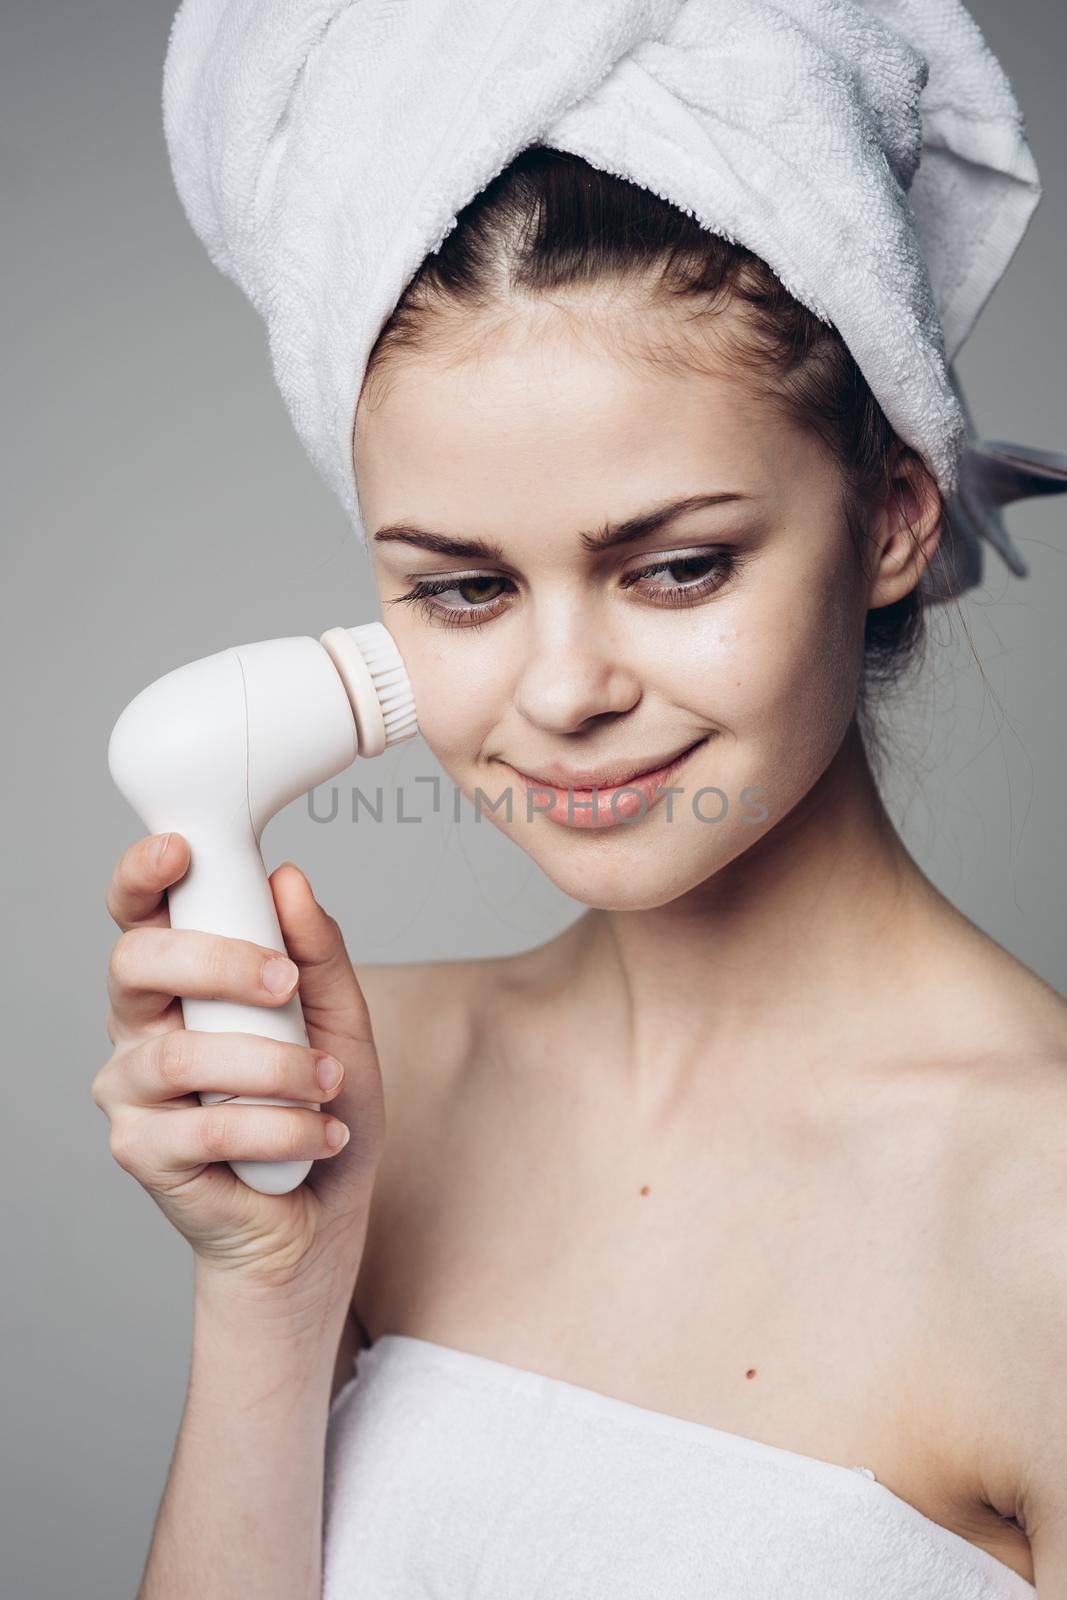 woman with towel on head facial massager skin care hygiene. High quality photo